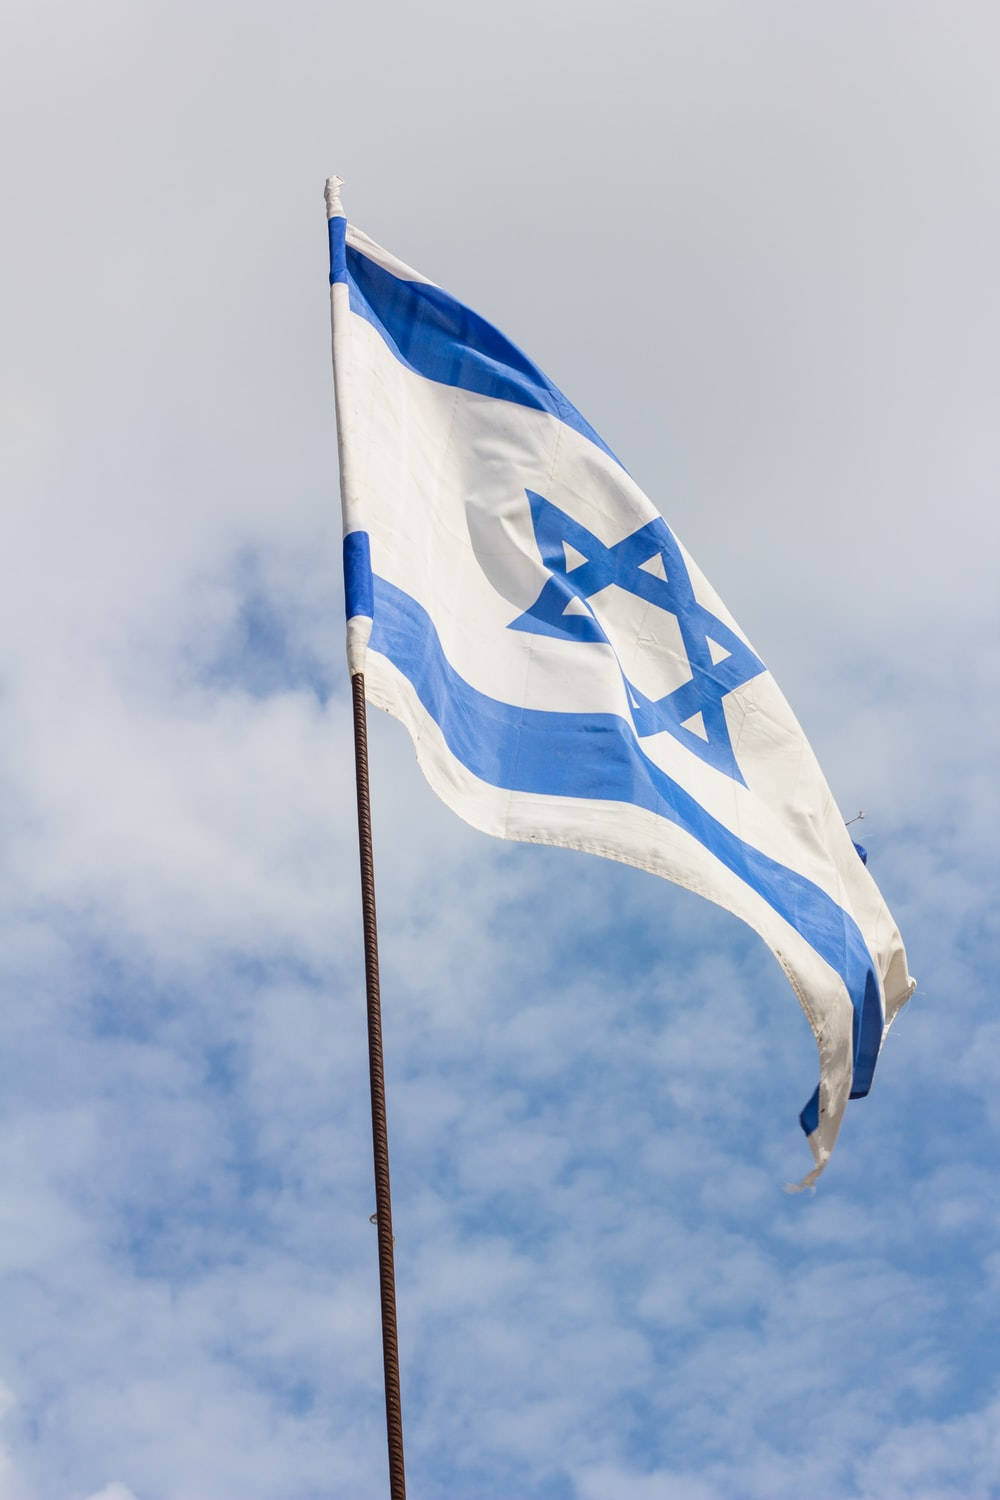 The National Flag Of Israel Proudly Displayed On A Metal Rod